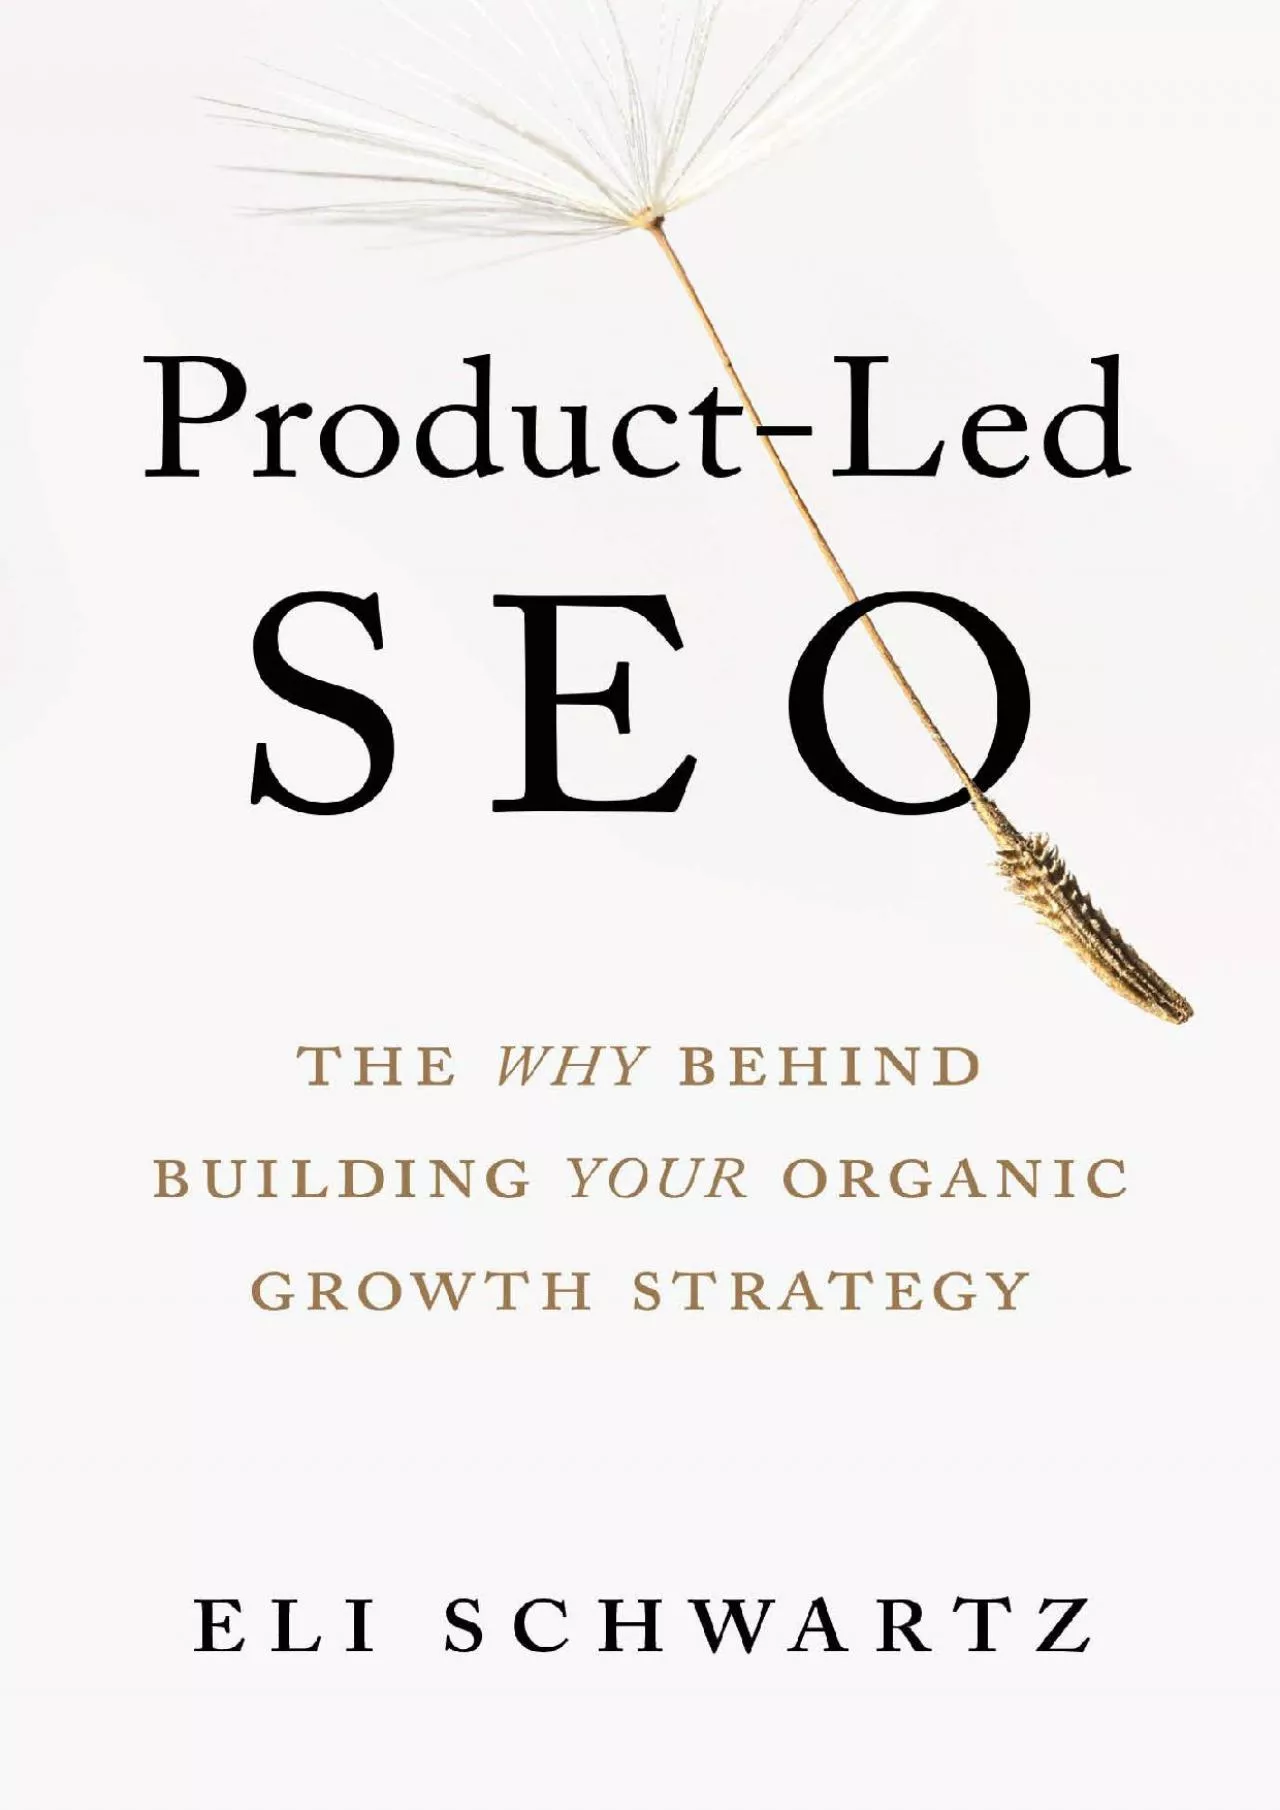 (BOOK)-Product-Led SEO: The Why Behind Building Your Organic Growth Strategy